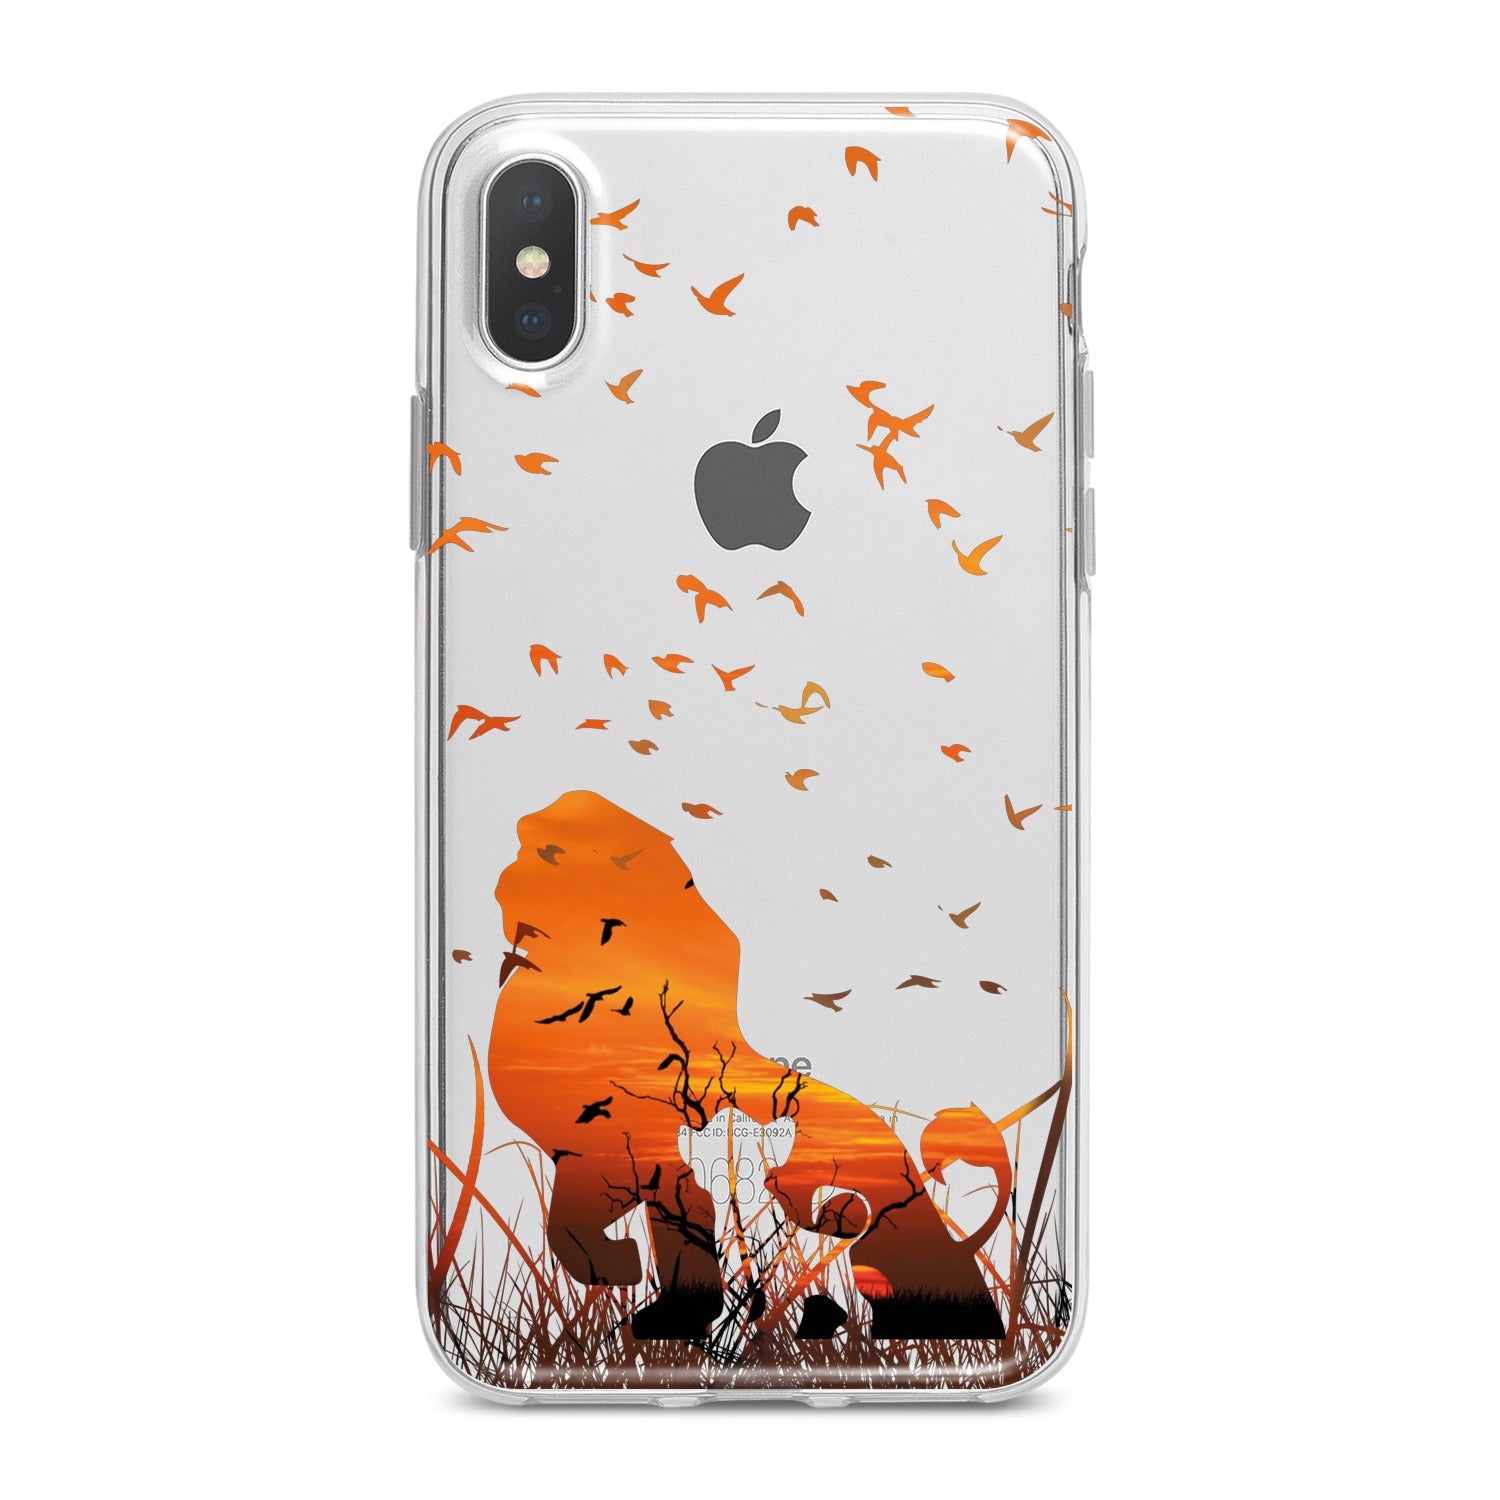 Lex Altern Lion King Phone Case for your iPhone & Android phone.